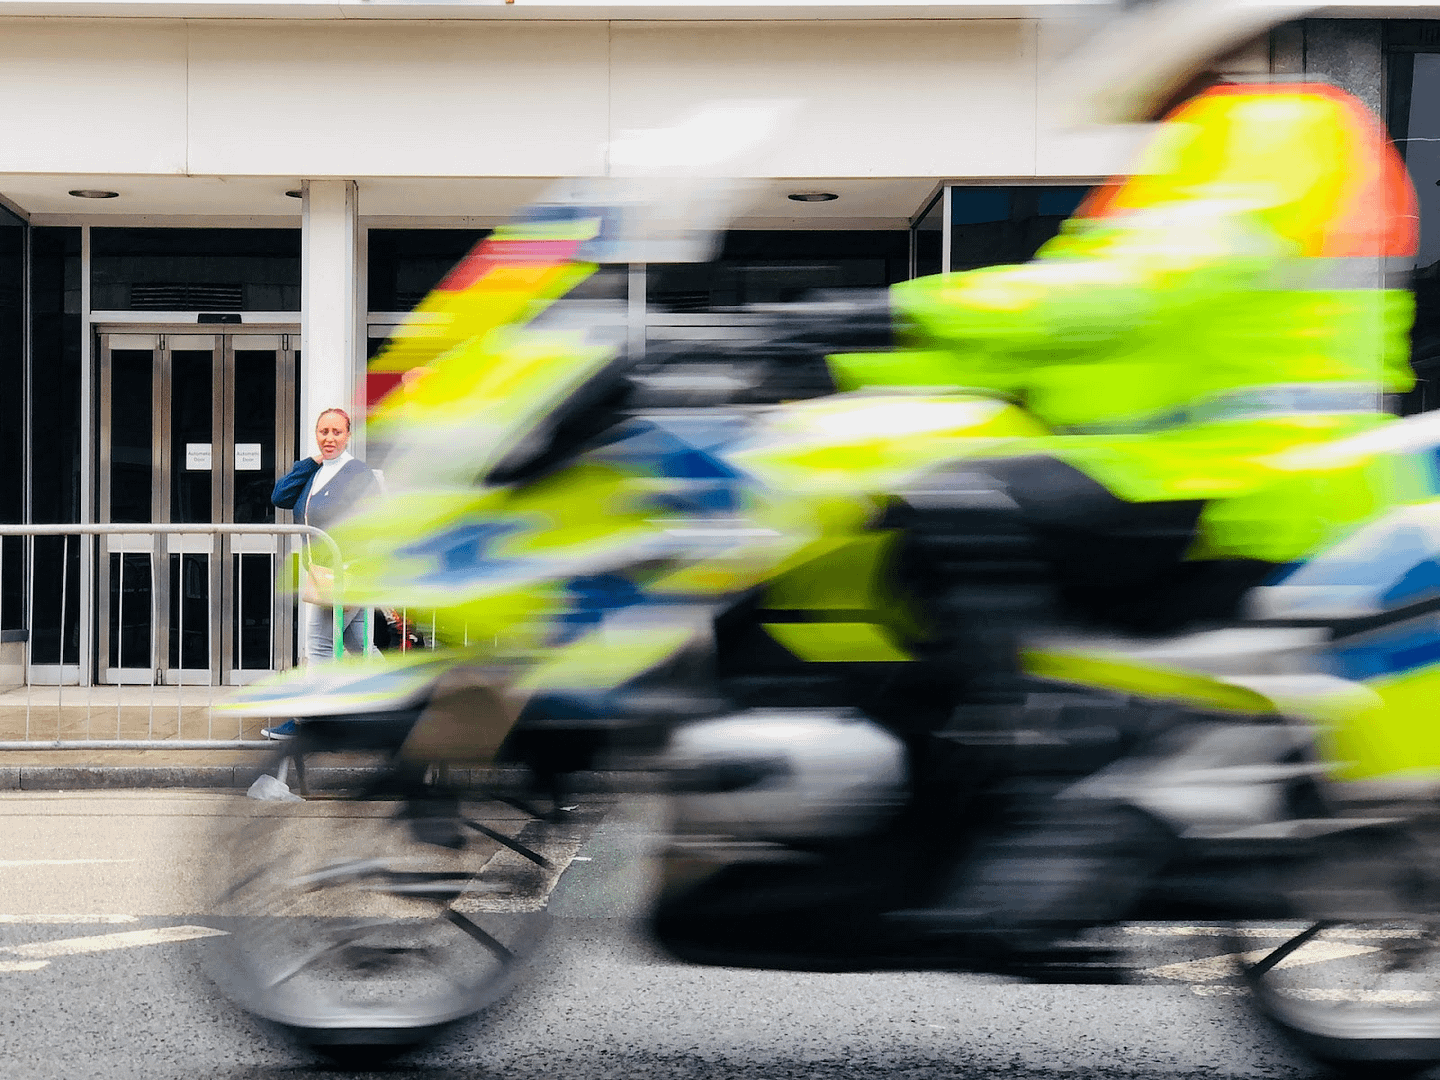 A blurred image of police on a motorbike